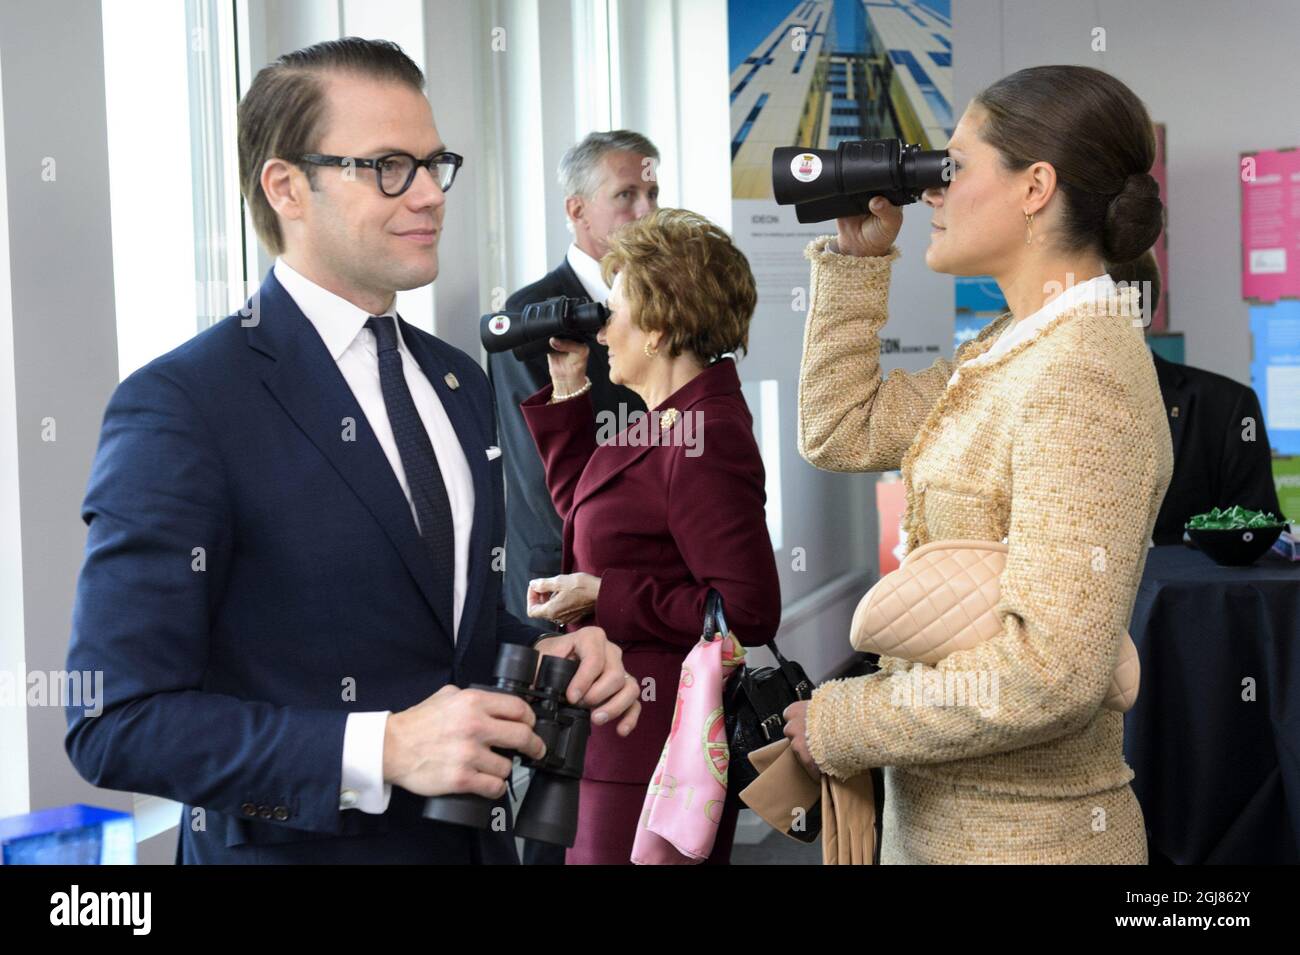 LUND 2013-10-03 Prince Daniel, Maria Cavaco Silva and Crown Princess Victoria are seen during a visit to Ideon Gateway in Lund, Sweden, October 3, 2013. The Crown Princess couple accompanied President Anibal Cavaco Silva and his wife Maria. The Ideon Gateway is a model for building a city part designed for research and innovation. The President of Portugal is on a State visit to Sweden. Foto: Ludvig Thunman / TT / Kod 10600  Stock Photo